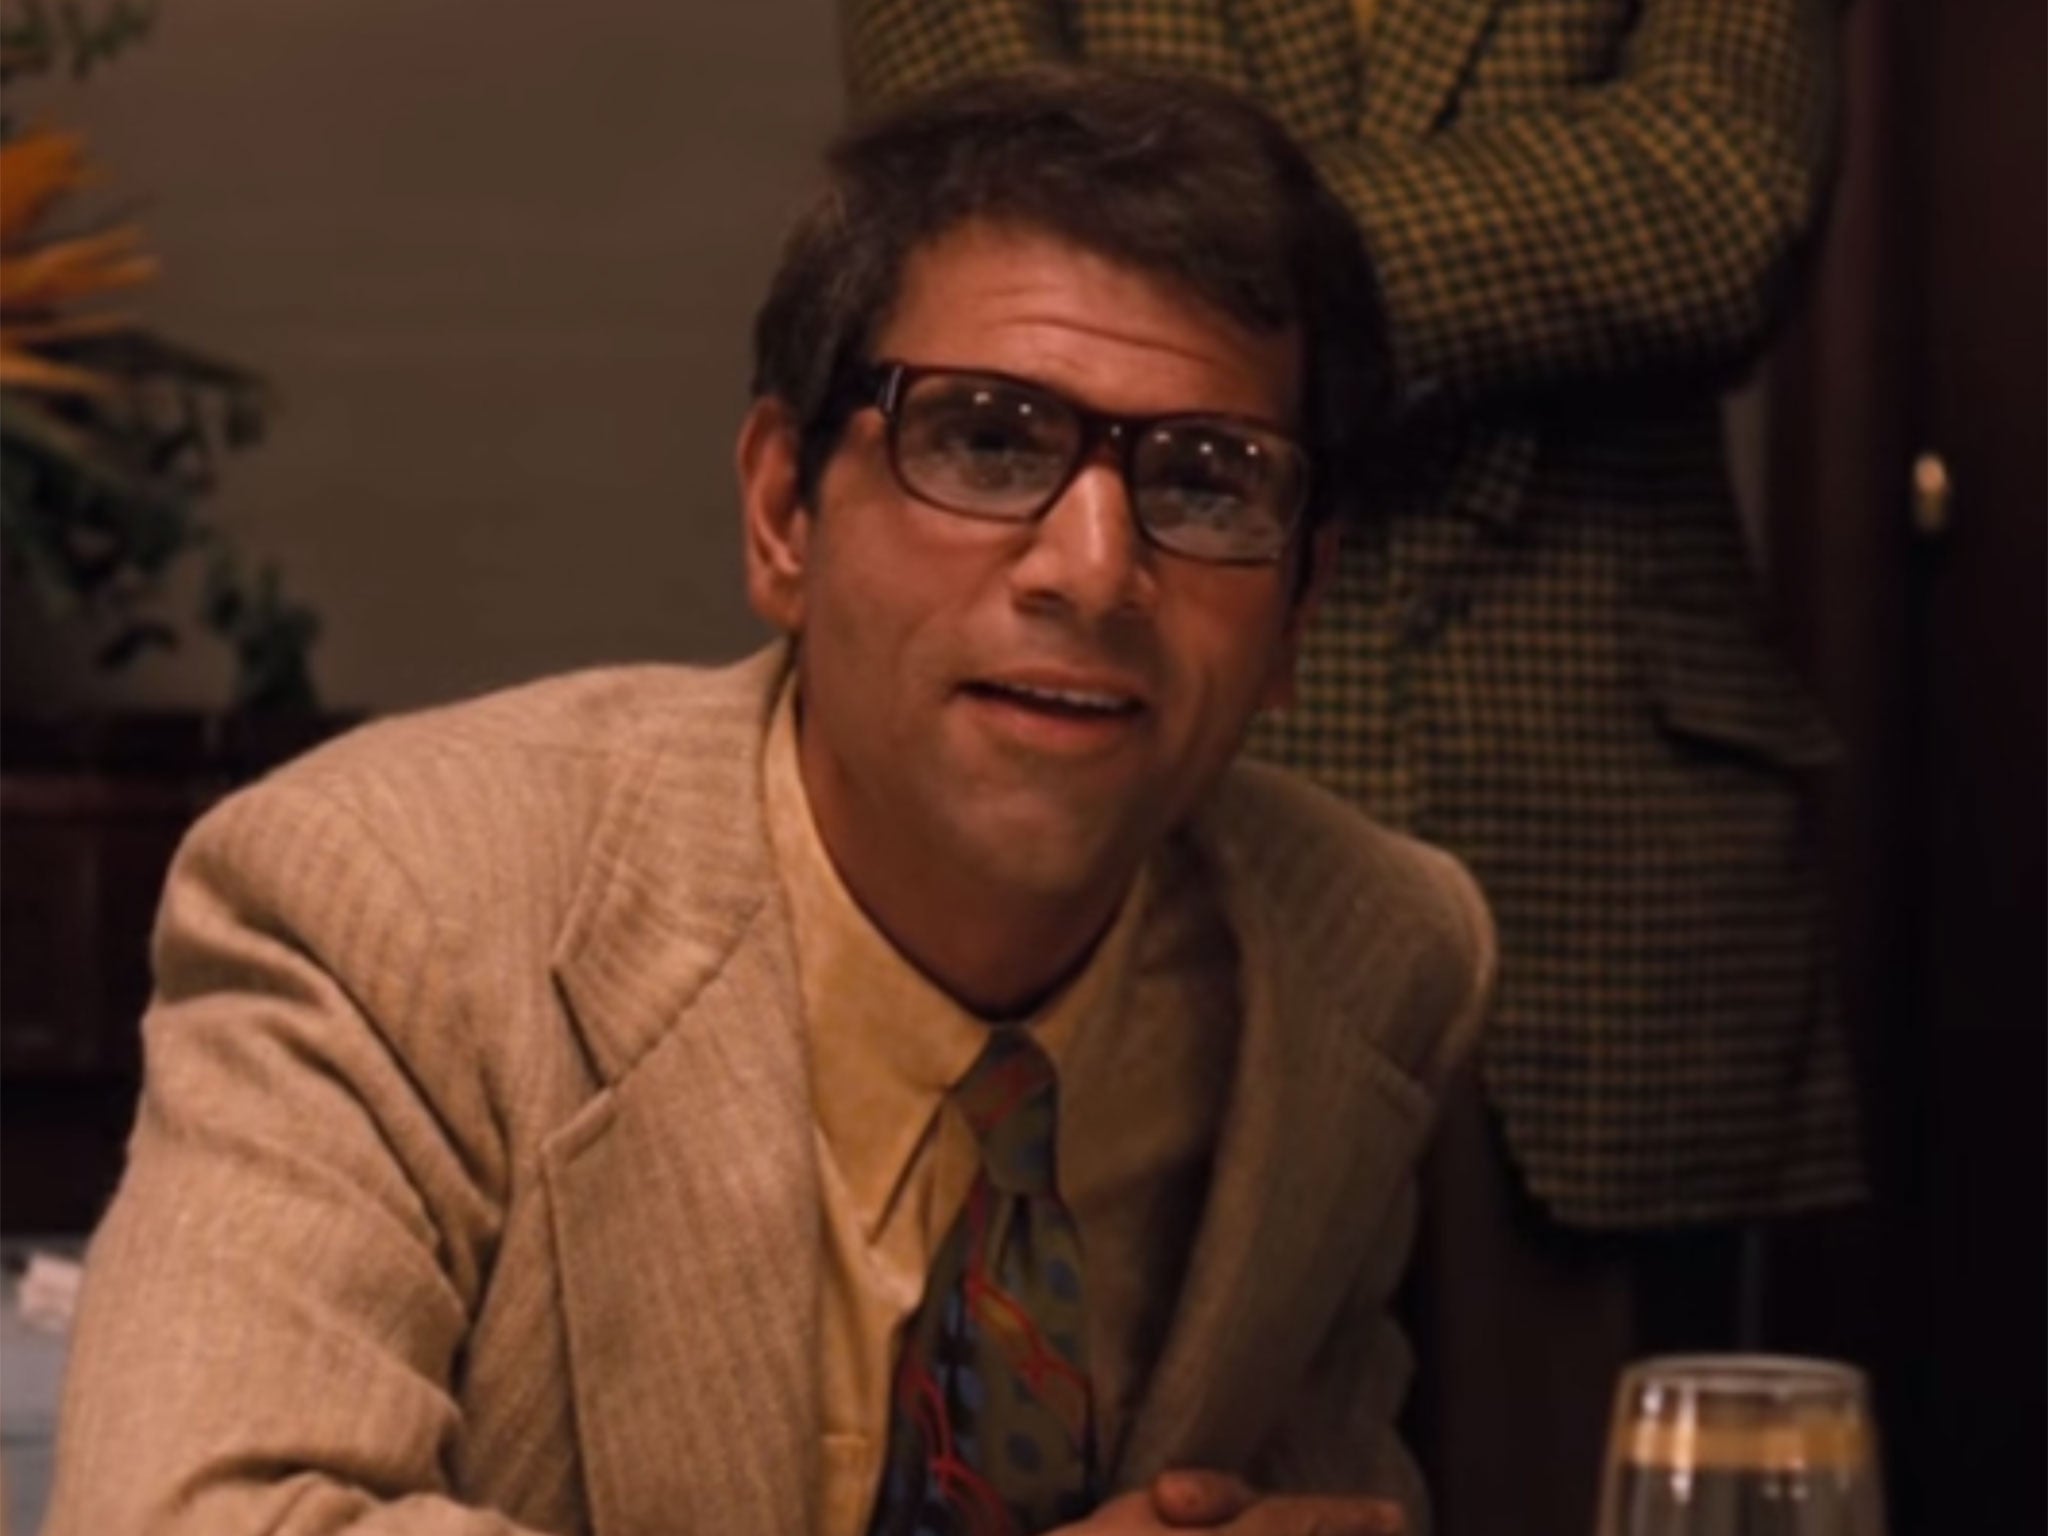 Alex Rocco as Moe Greene in The Godfather